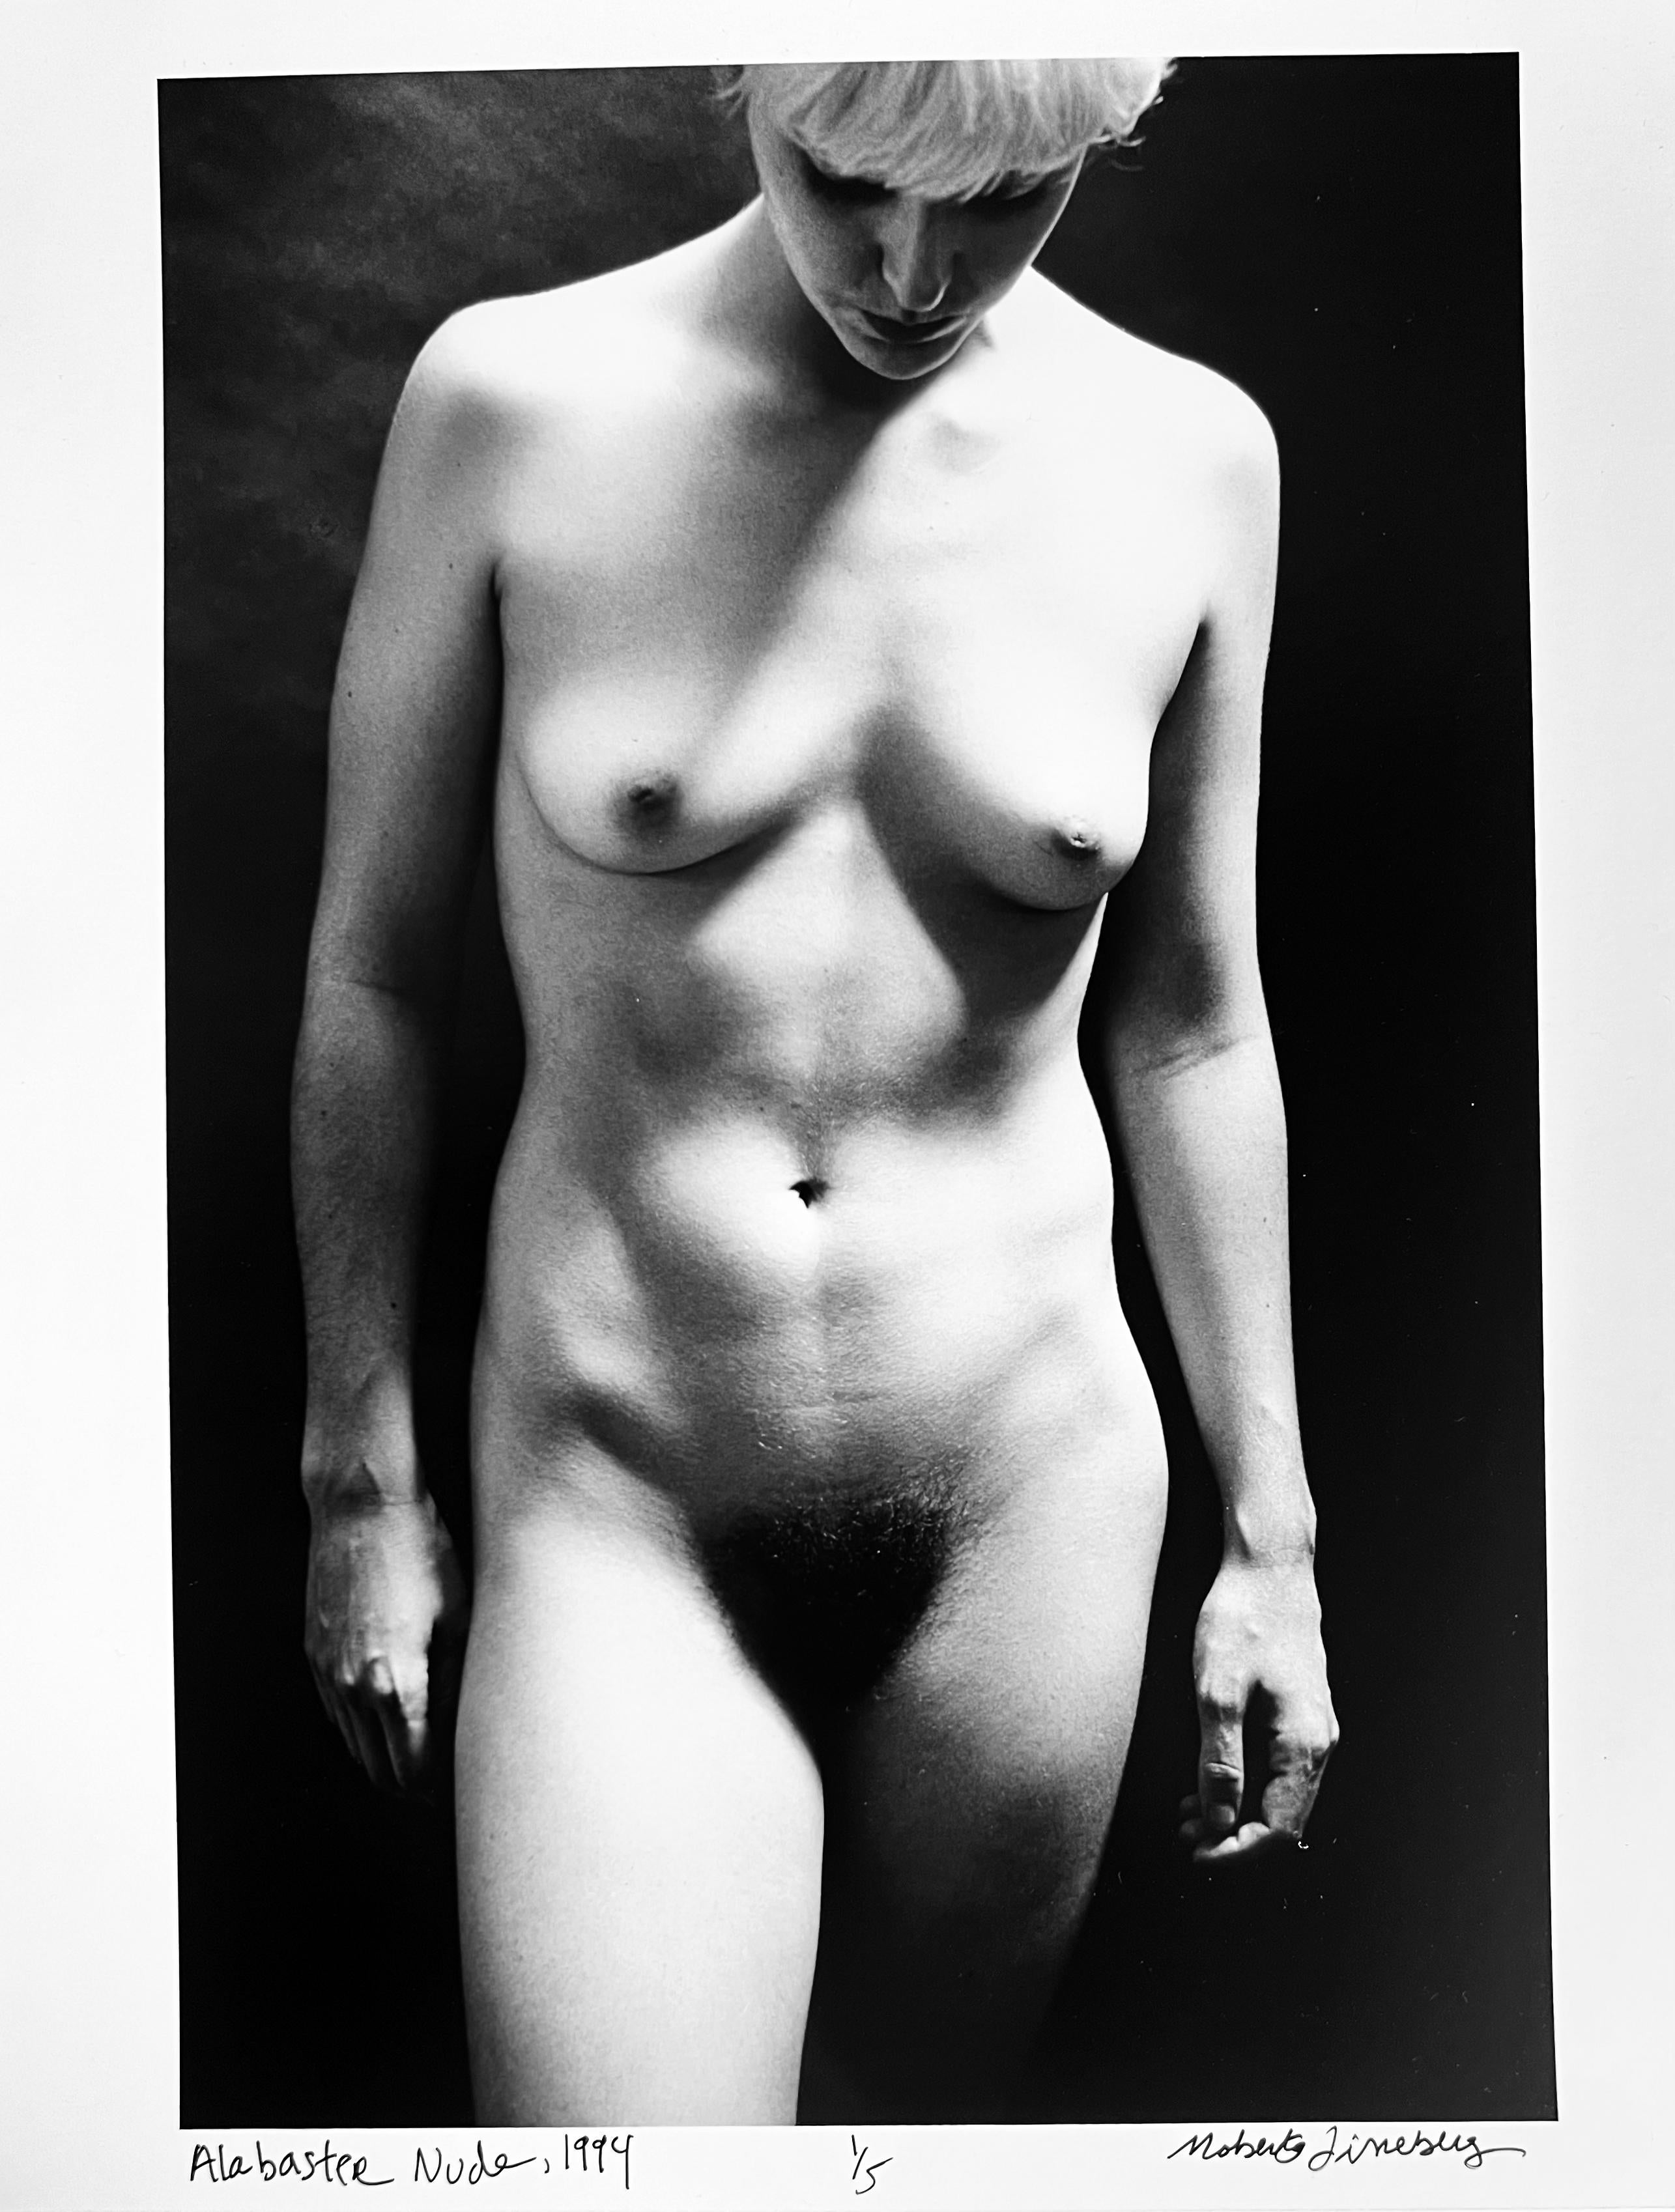 Alabaster Nude, New York, Black and White Photograph of  Female Nude